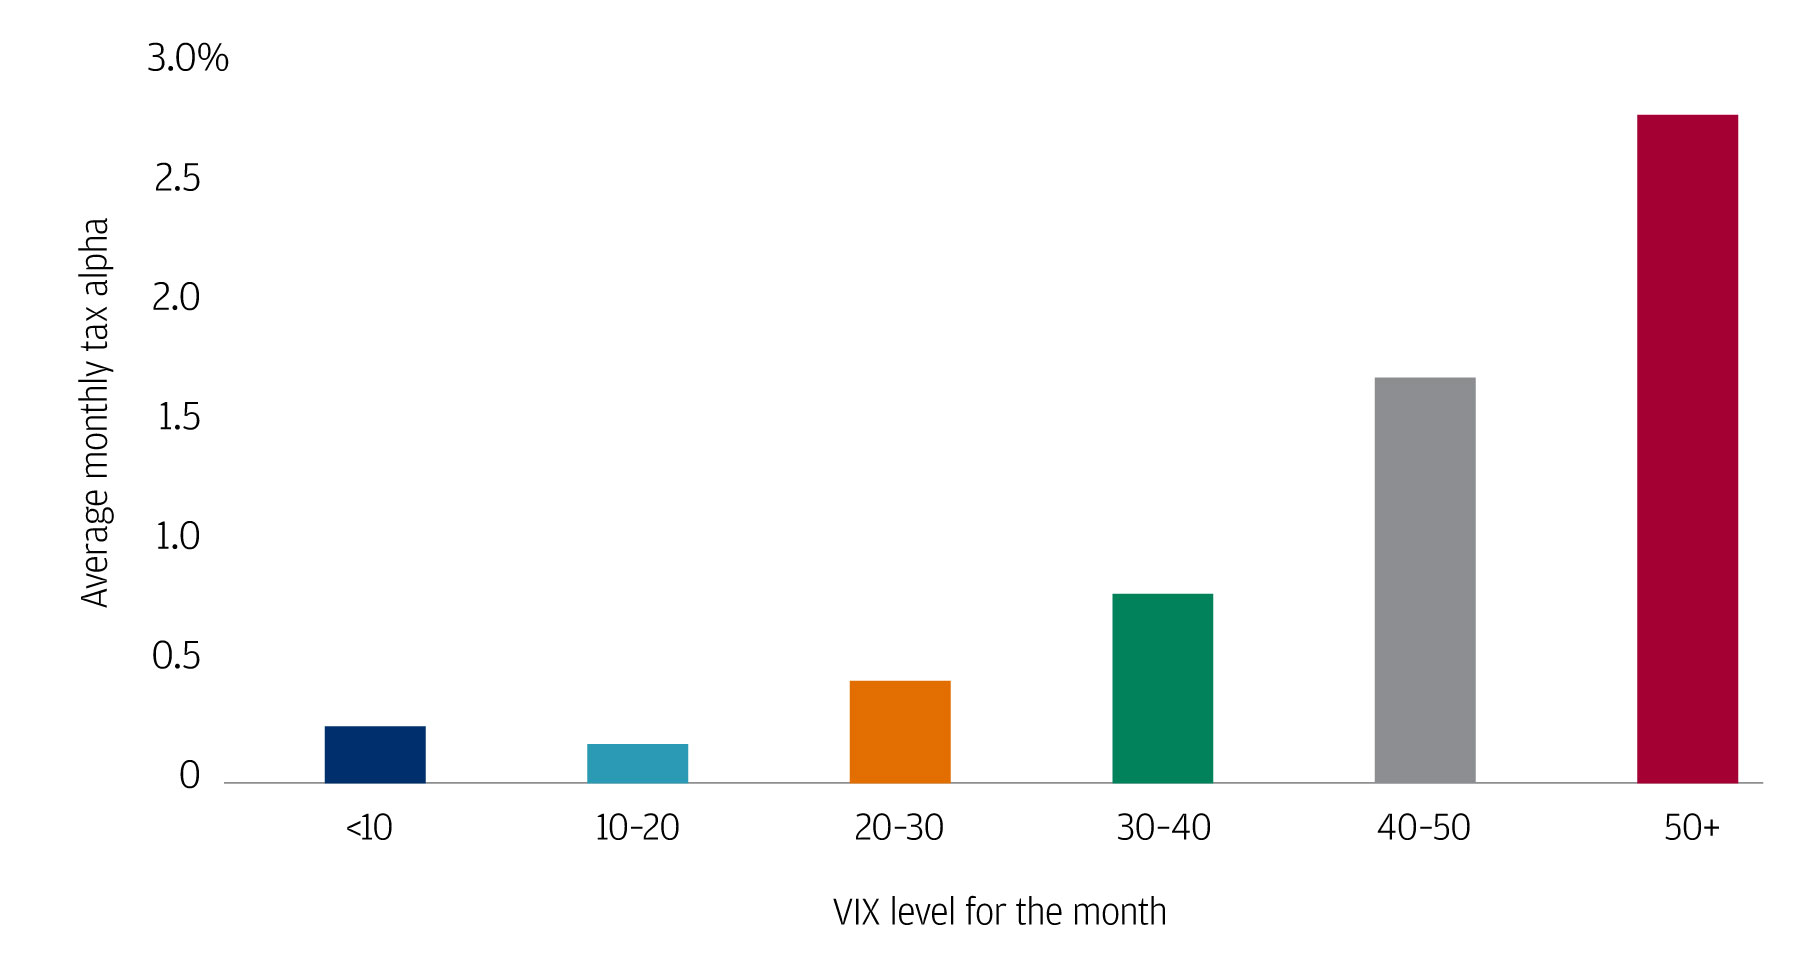 Bar chart illustrating the relationship between market volatility and potential tax savings. More specifically, the chart analyzes the relationship between the VIX (ticker symbol for the Chicago Board Options Exchange’s CBOE Volatility Index) level for the month (x-axis) and monthly tax alpha (y-axis) between 2007-2021. From these results, we can see that investors may experience potential tax savings during periods of market volatility. 